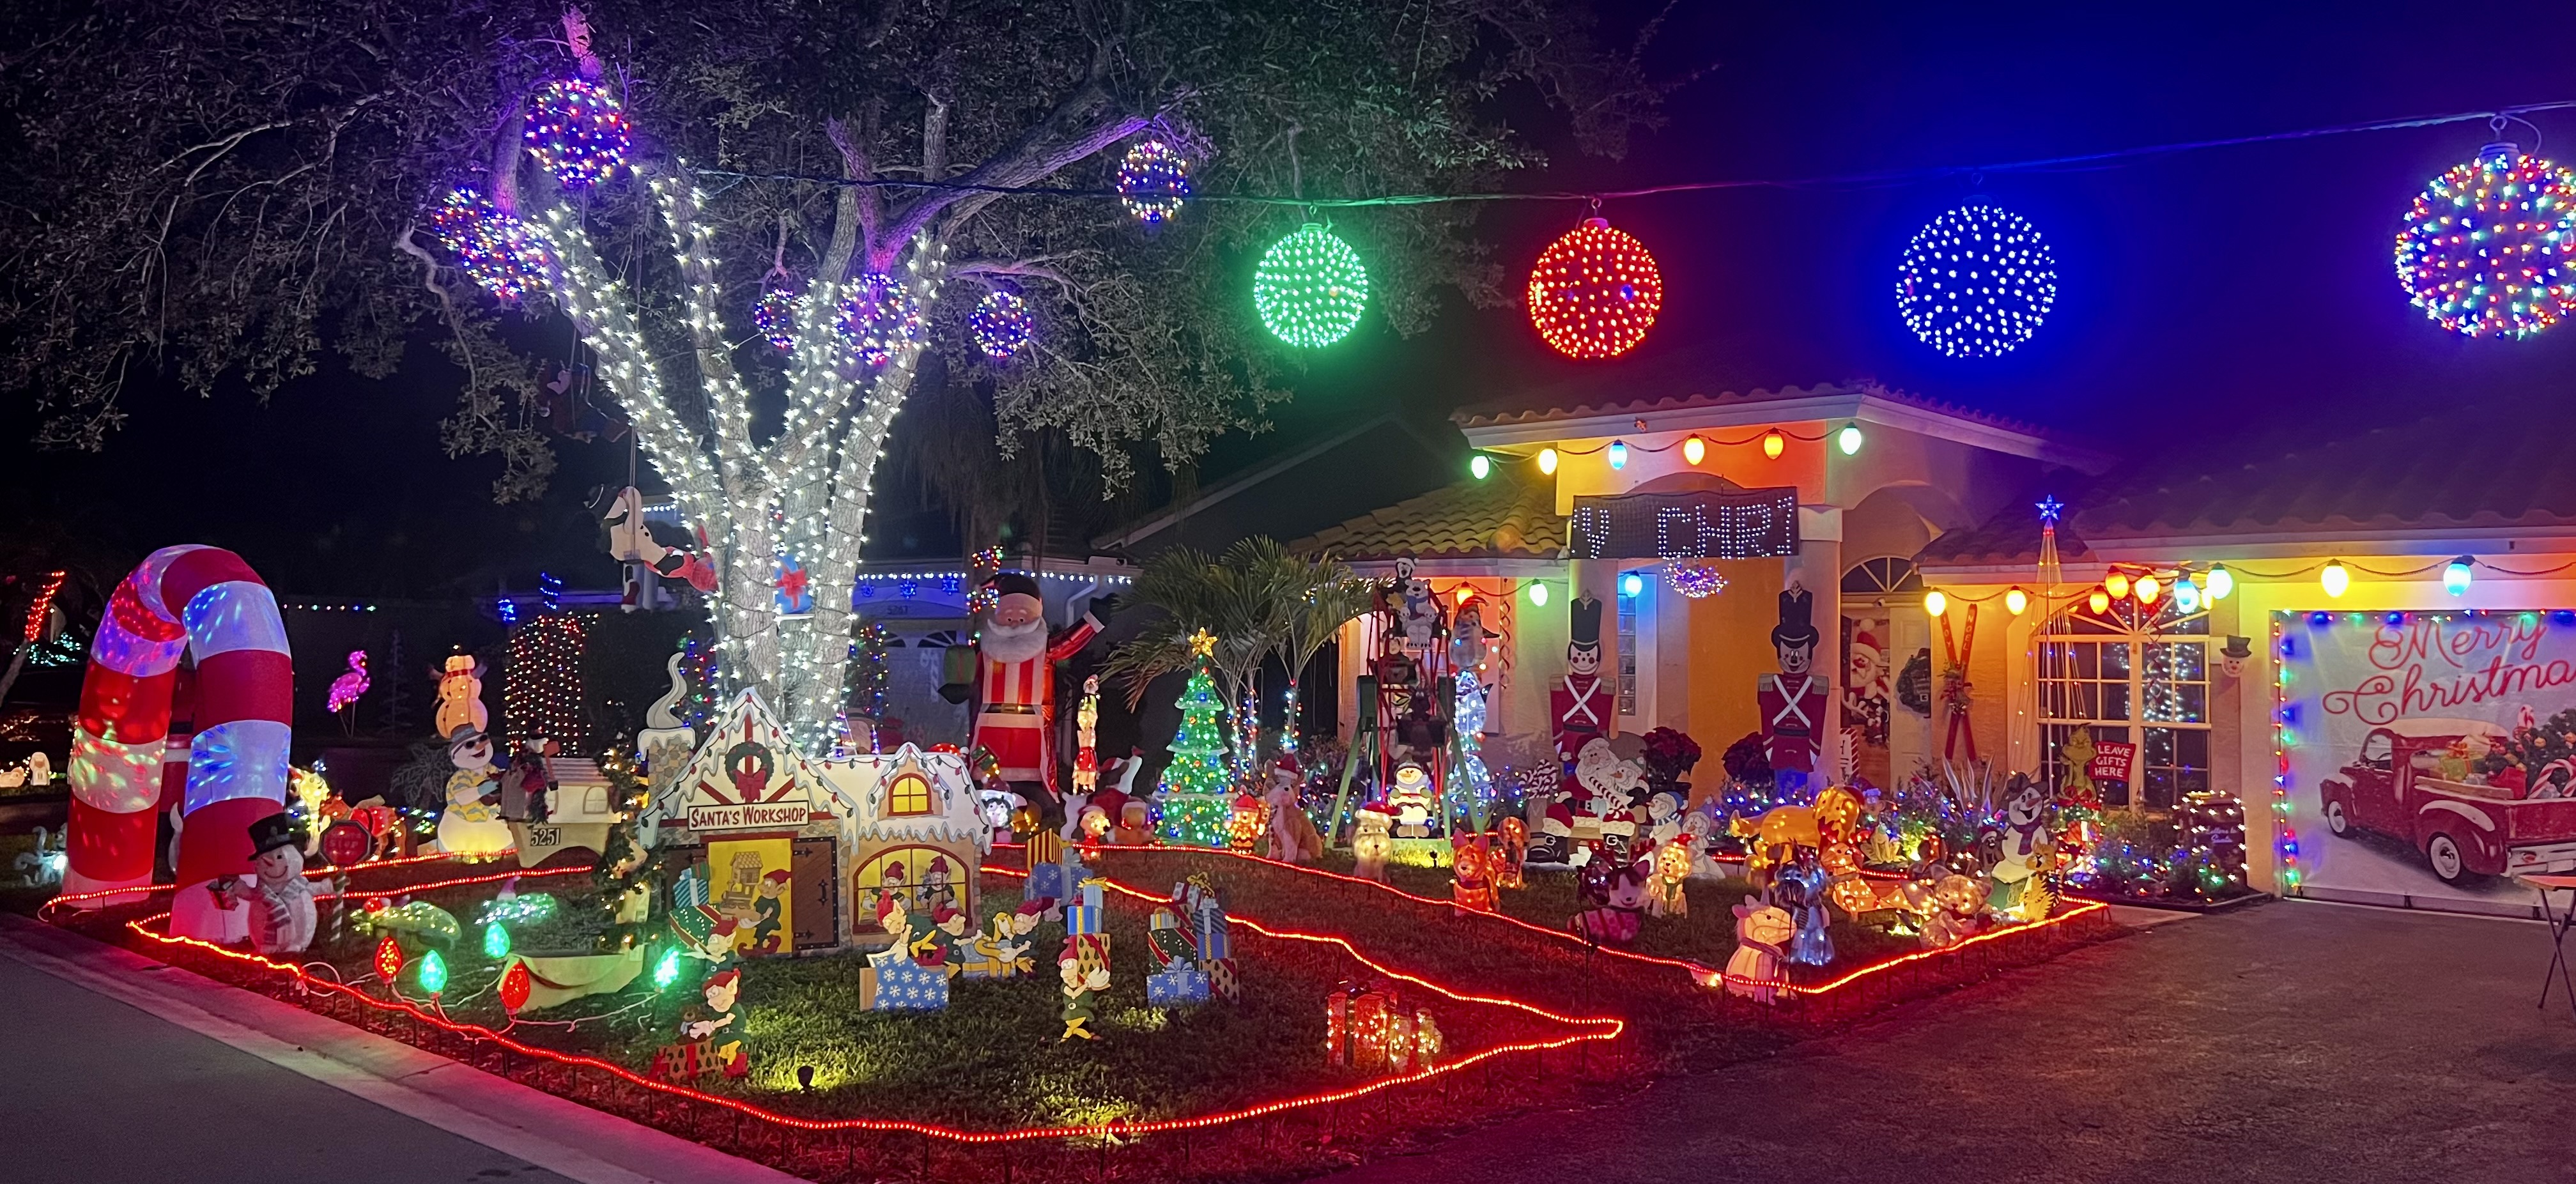 Deck the Halls - Holiday Lights winner -  3rd place house